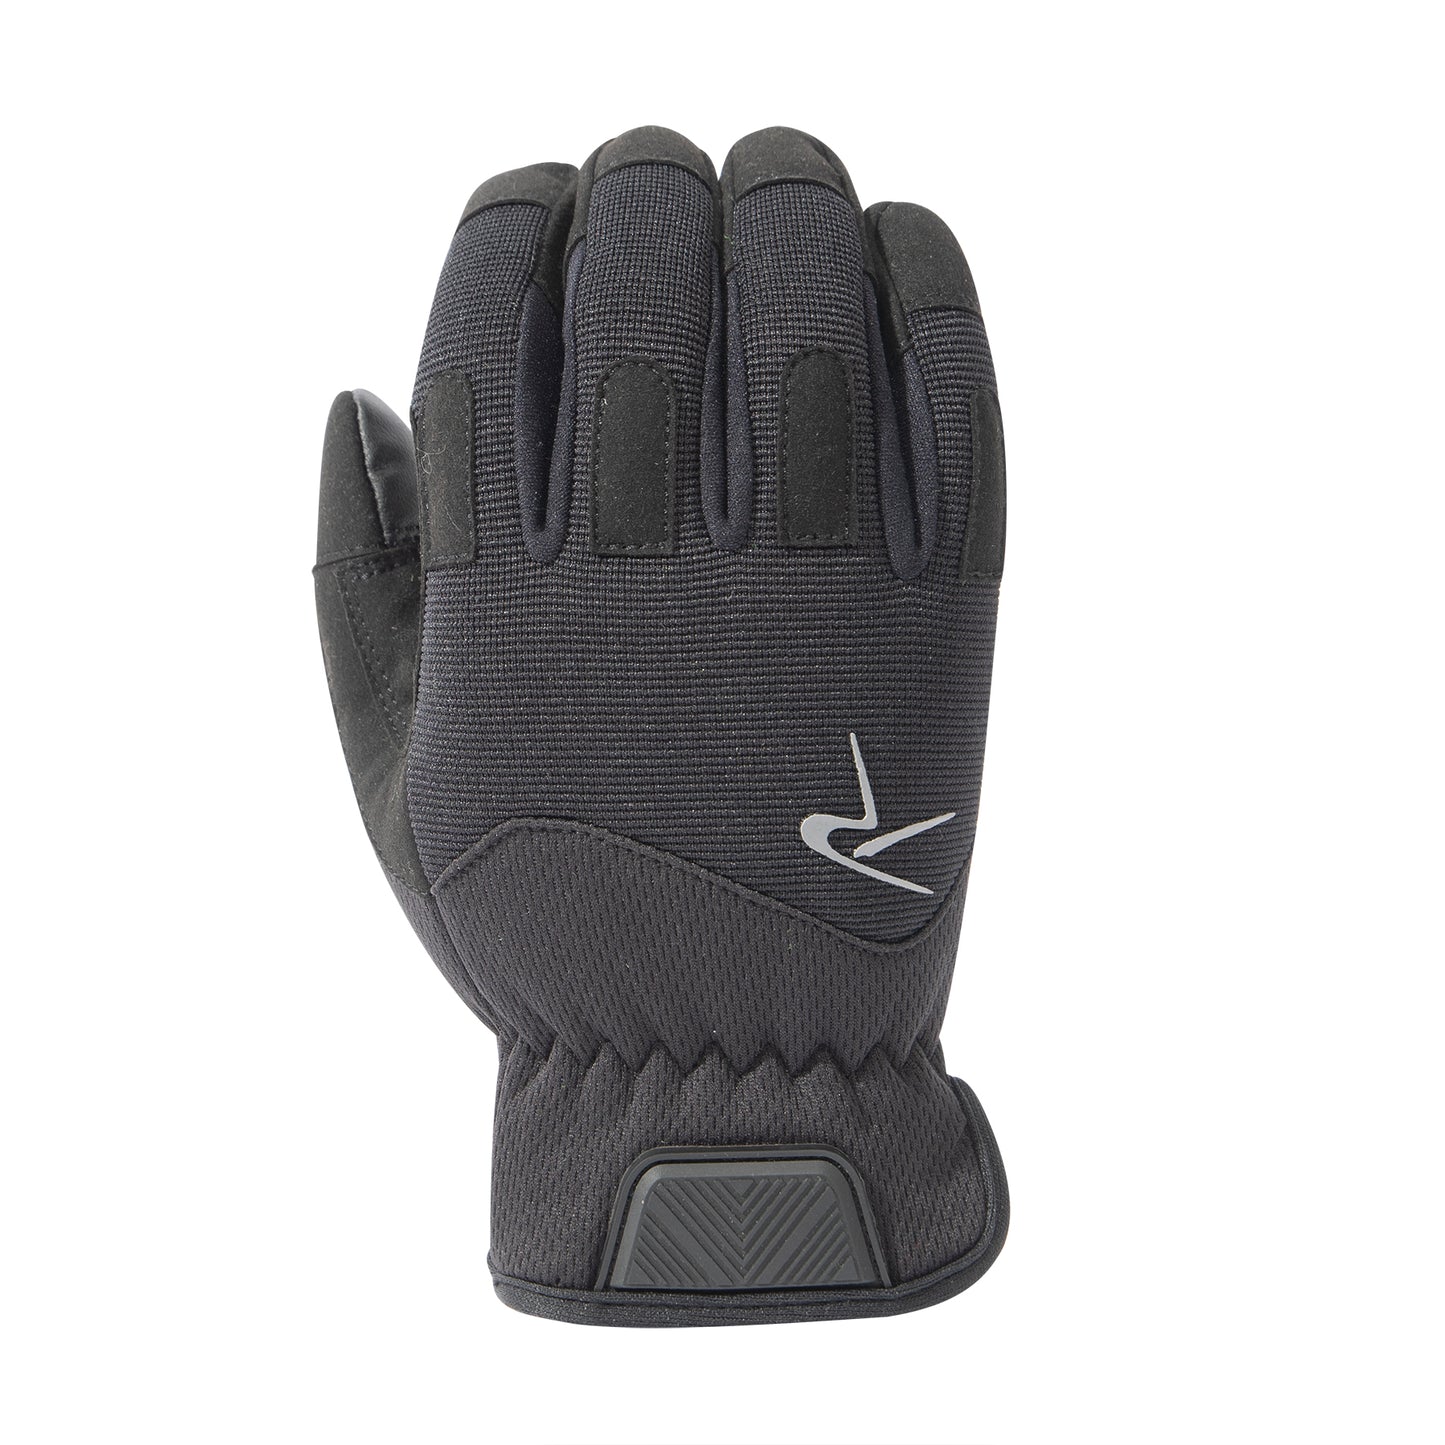 Rothco Rapid Fit Work Duty Tactical Gloves